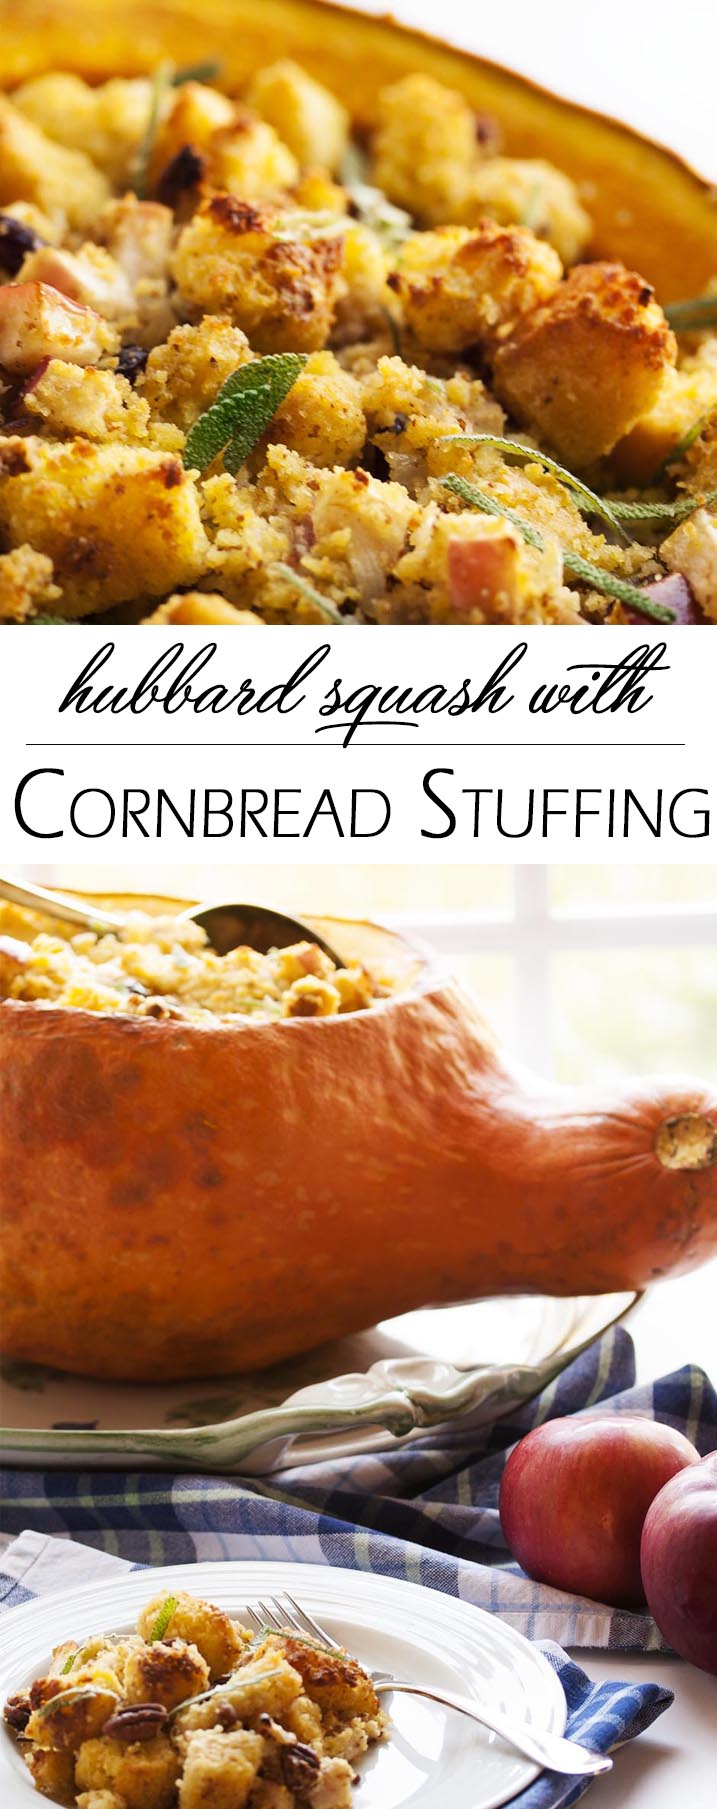 Hubbard Squash with Cornbread Stuffing - Looking for an impressive vegetarian centerpiece or side dish for your Thanksgiving table? Look no more! Filling a Hubbard squash with delicious cornbread stuffing is sure to produce oohs and ahhs. | justalittlebitofbacon.com